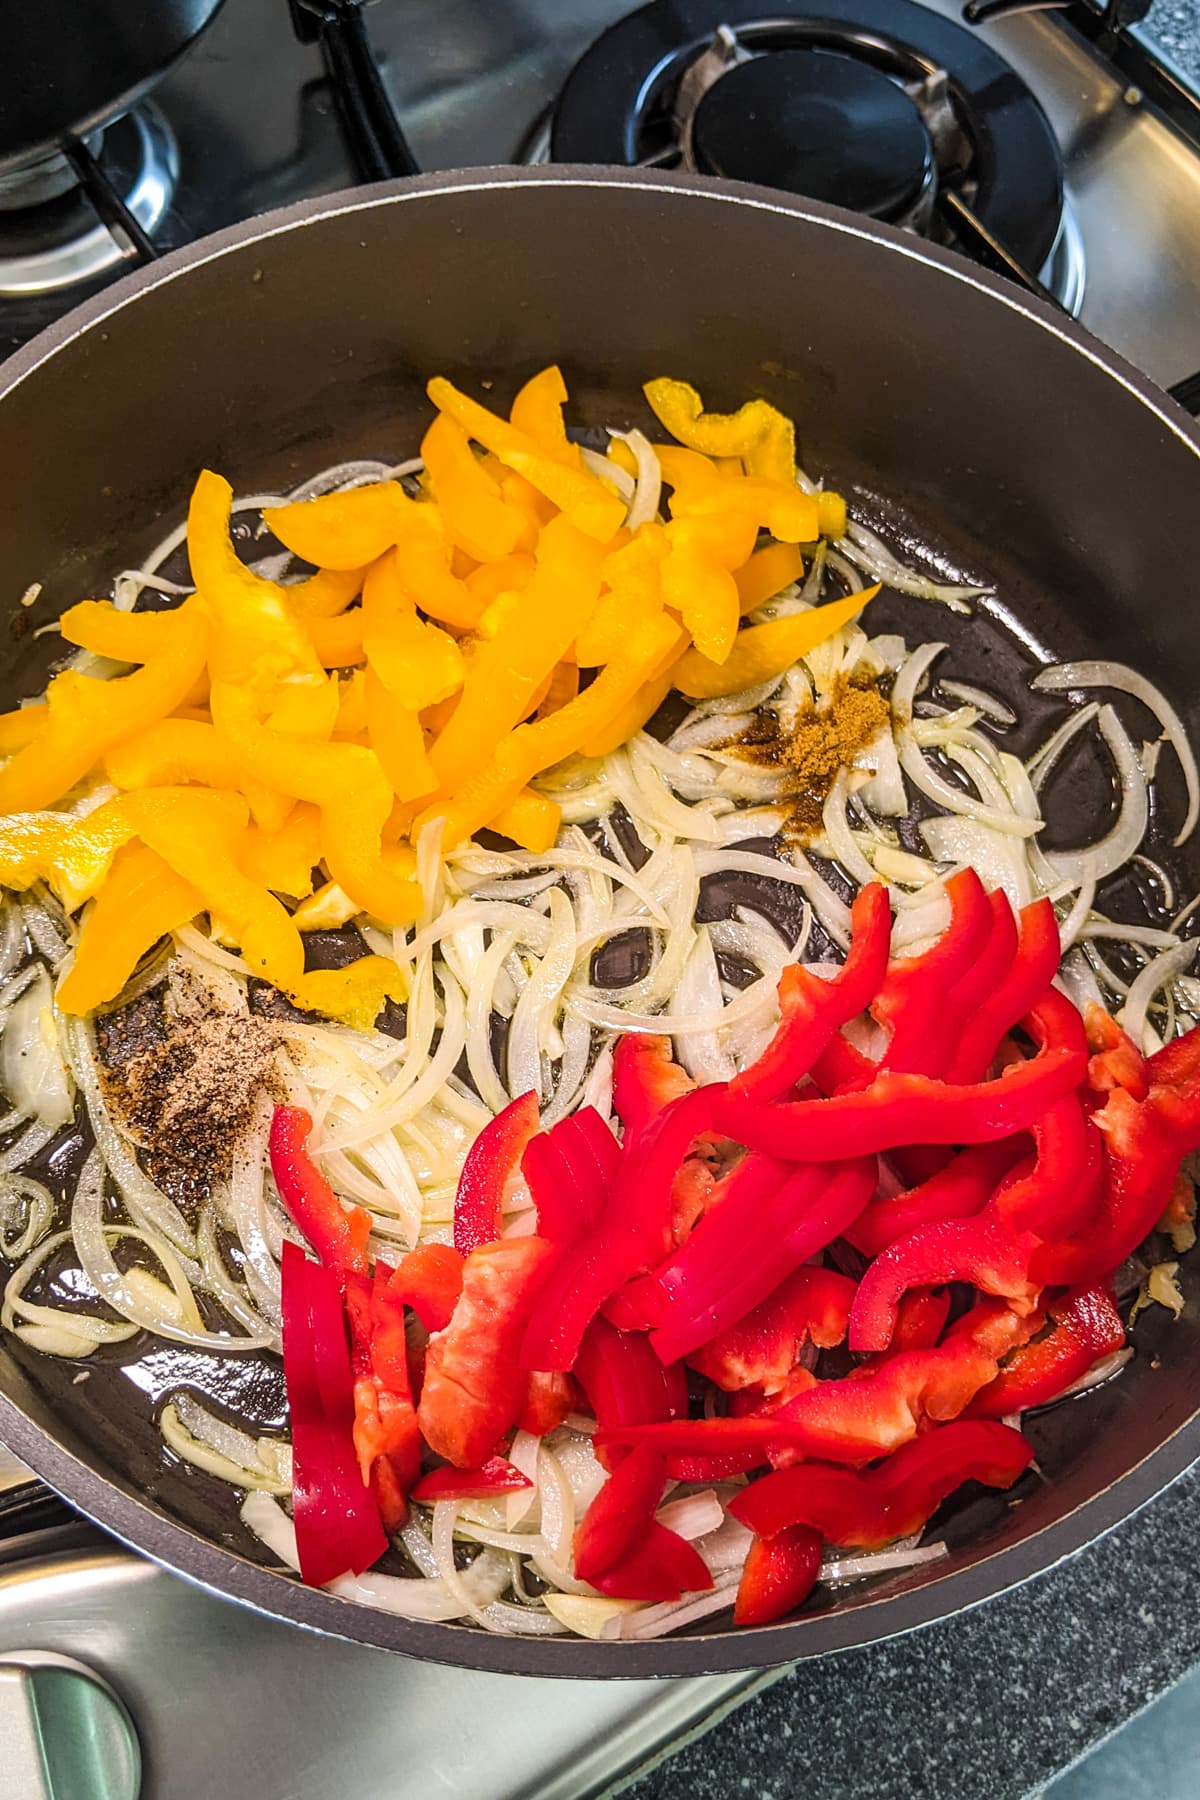 Raw sliced bell peppers over fried onions in a frying pan.